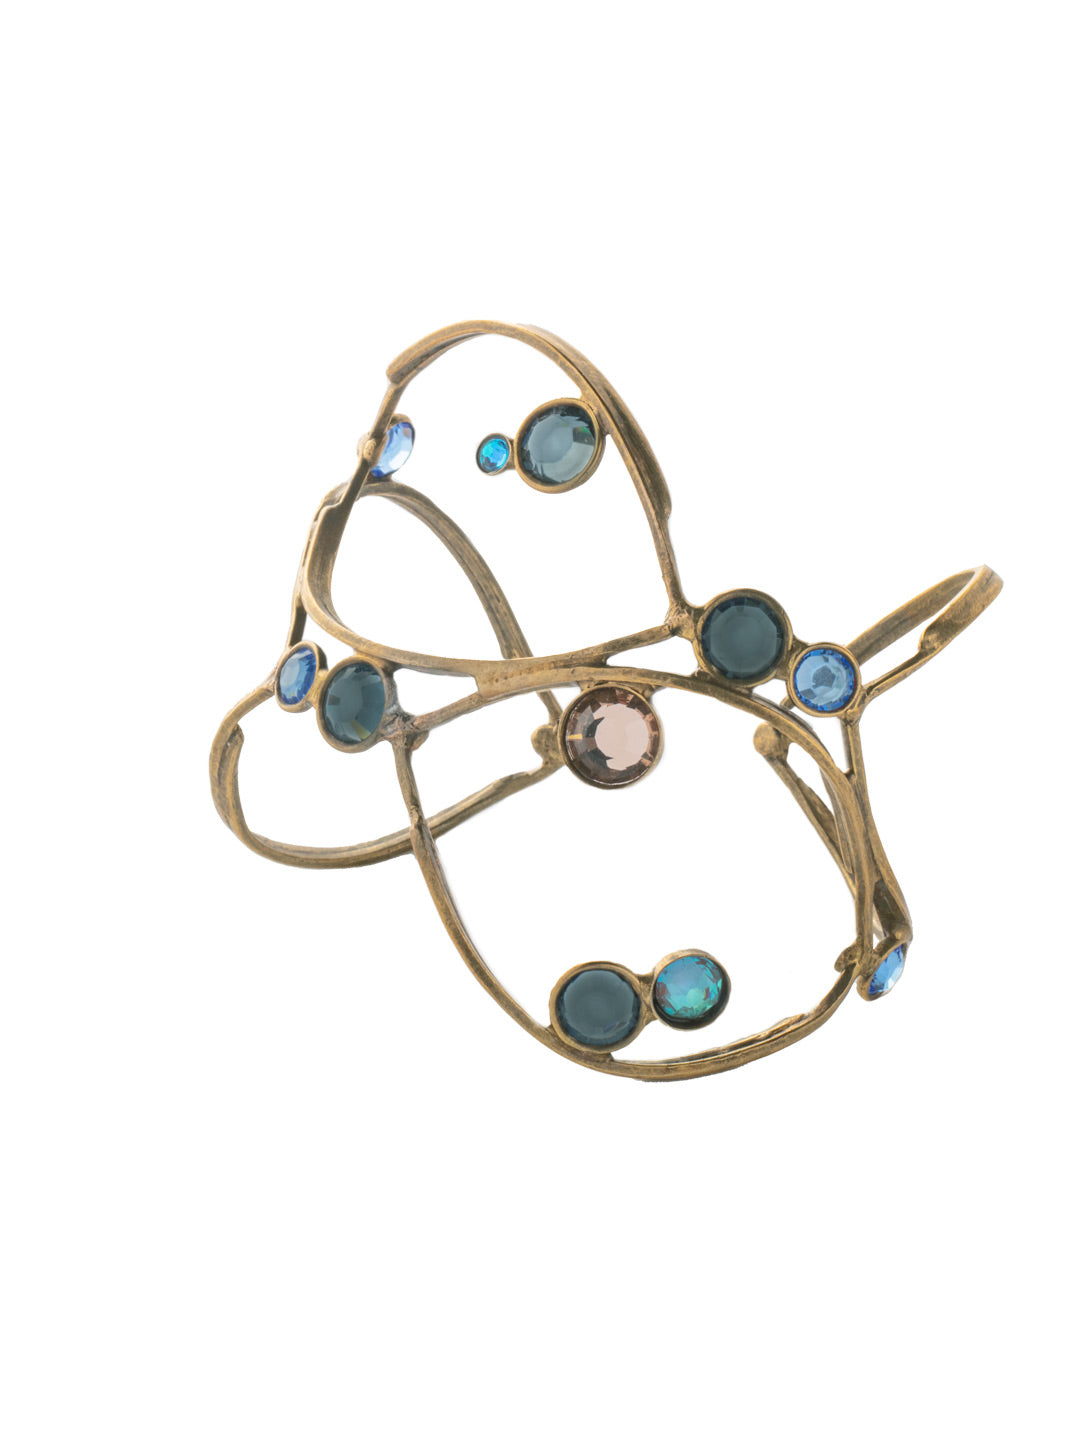 Charlene Cuff Bracelet - BFC52AGVBN - <p>The Charlene Cuff Bracelet combines delicate crystal channels and intricate metalwork to create a gorgeous statement piece. From Sorrelli's Venice Blue collection in our Antique Gold-tone finish.</p>